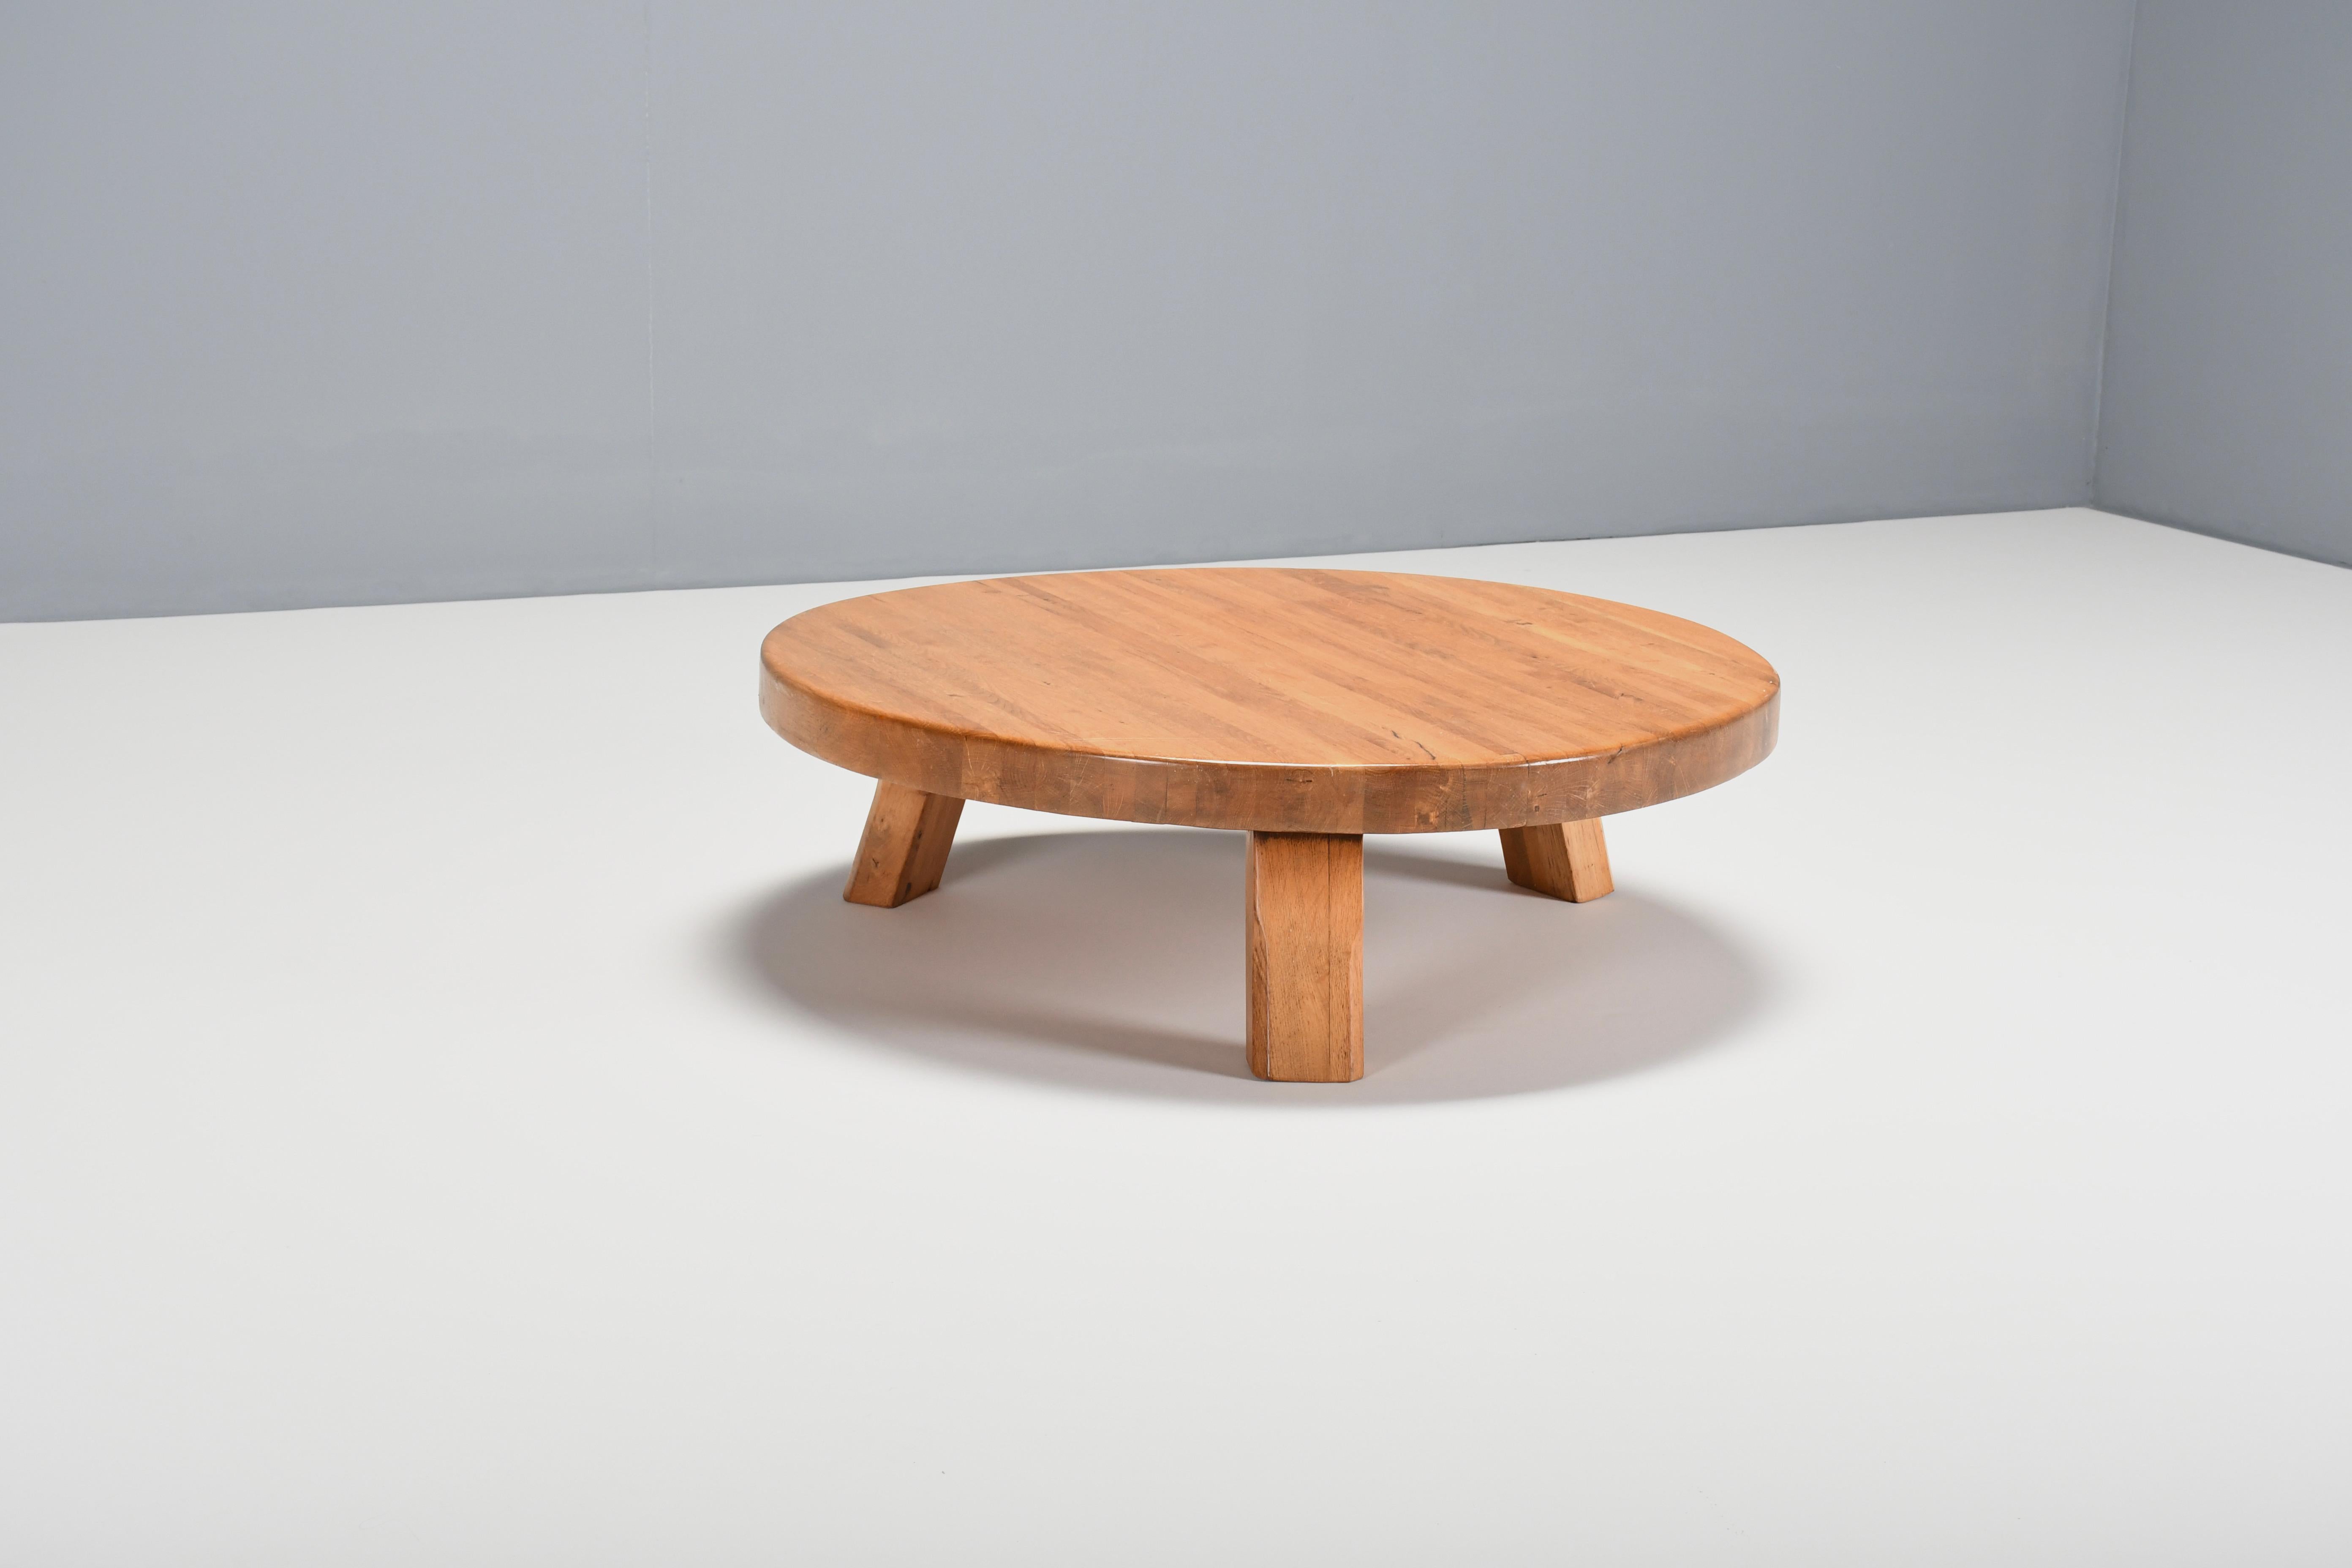 Impressive handmade coffee table in very good original condition. 

The table is made of solid French oak. 

The thick round top has a beautiful warm color and is made of narrow beams which gives a beautiful effect.

The base is also made of solid